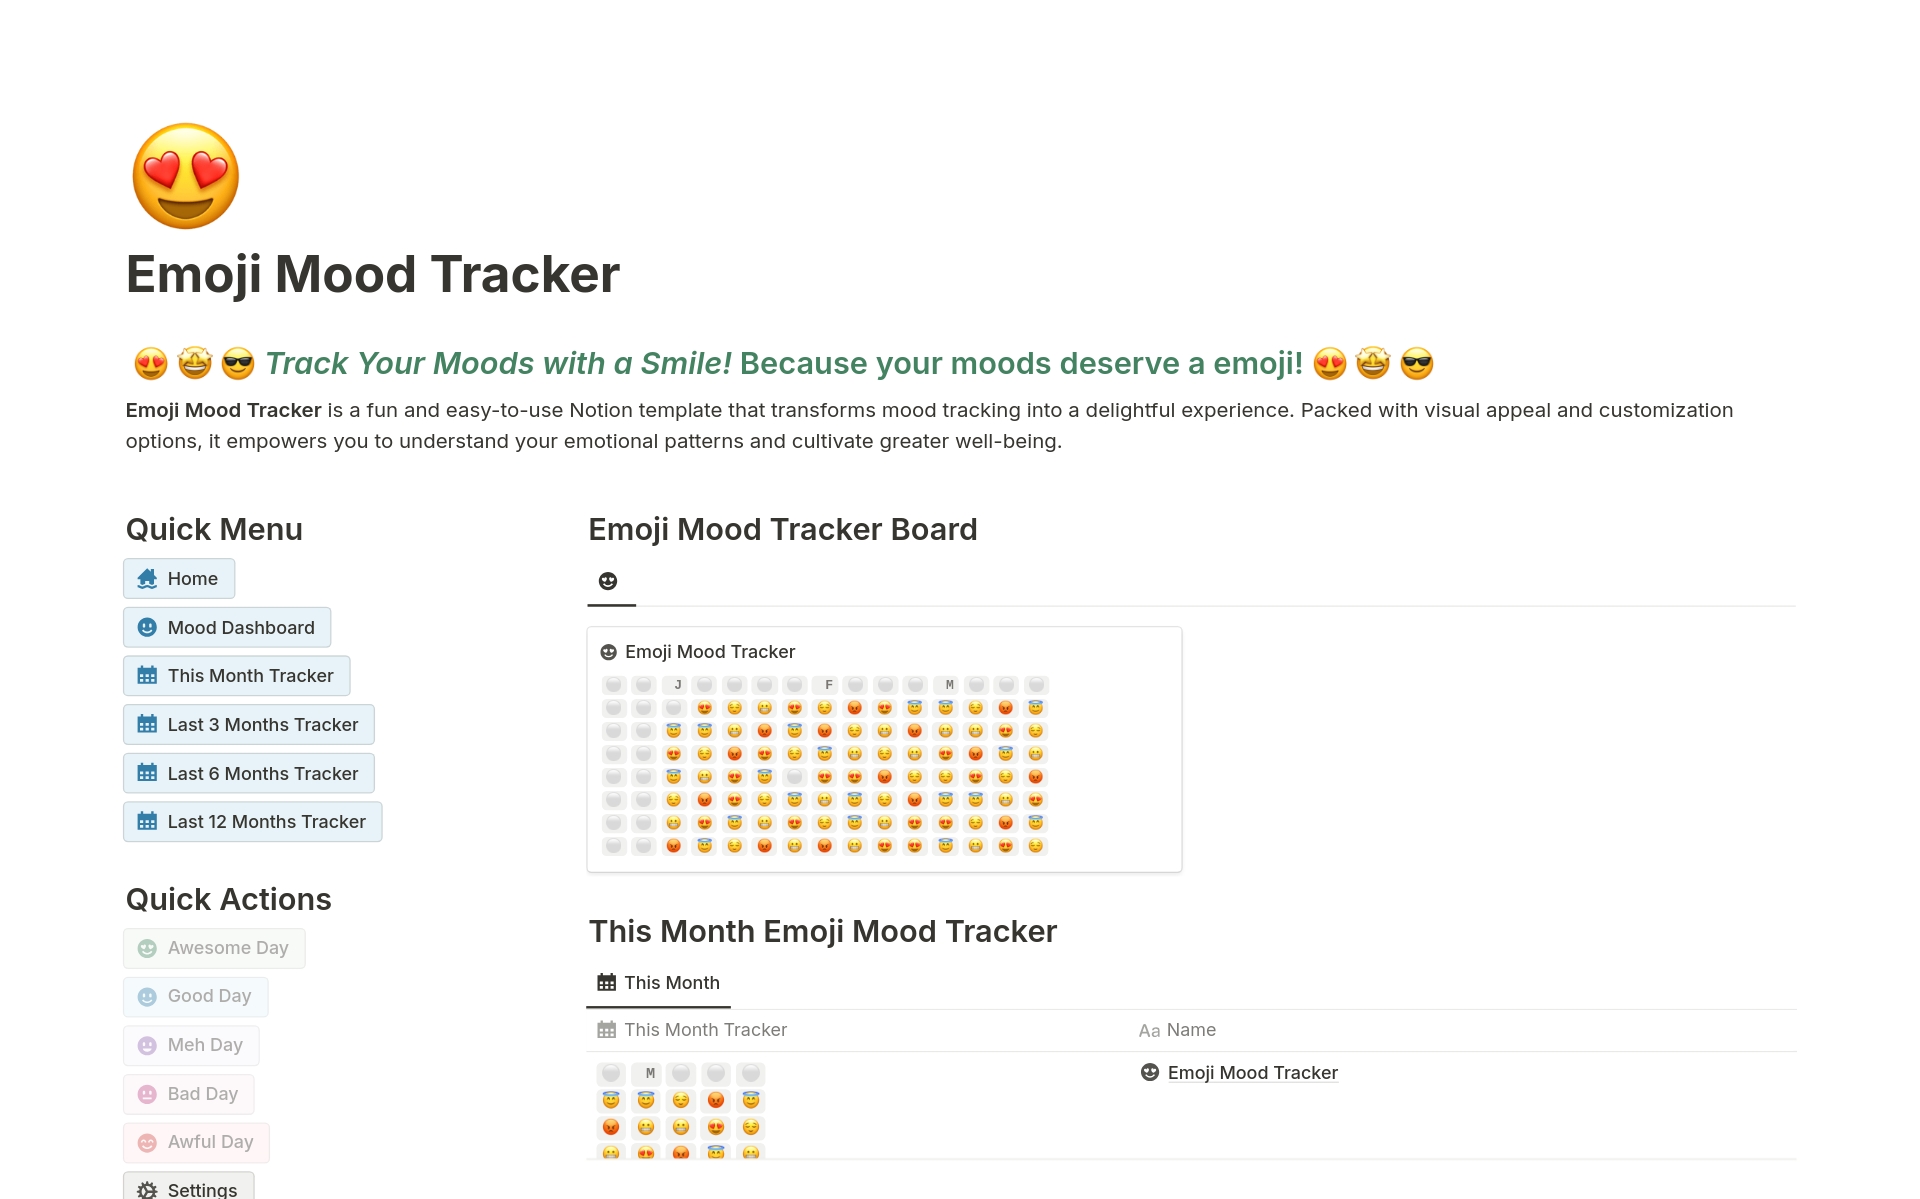  😍 🤩 😎 Track Your Moods with a Smile! Because your moods deserve a emoji! 😍 🤩 😎
Emoji Mood Tracker is a fun and easy-to-use Notion template that transforms mood tracking into a delightful experience. 